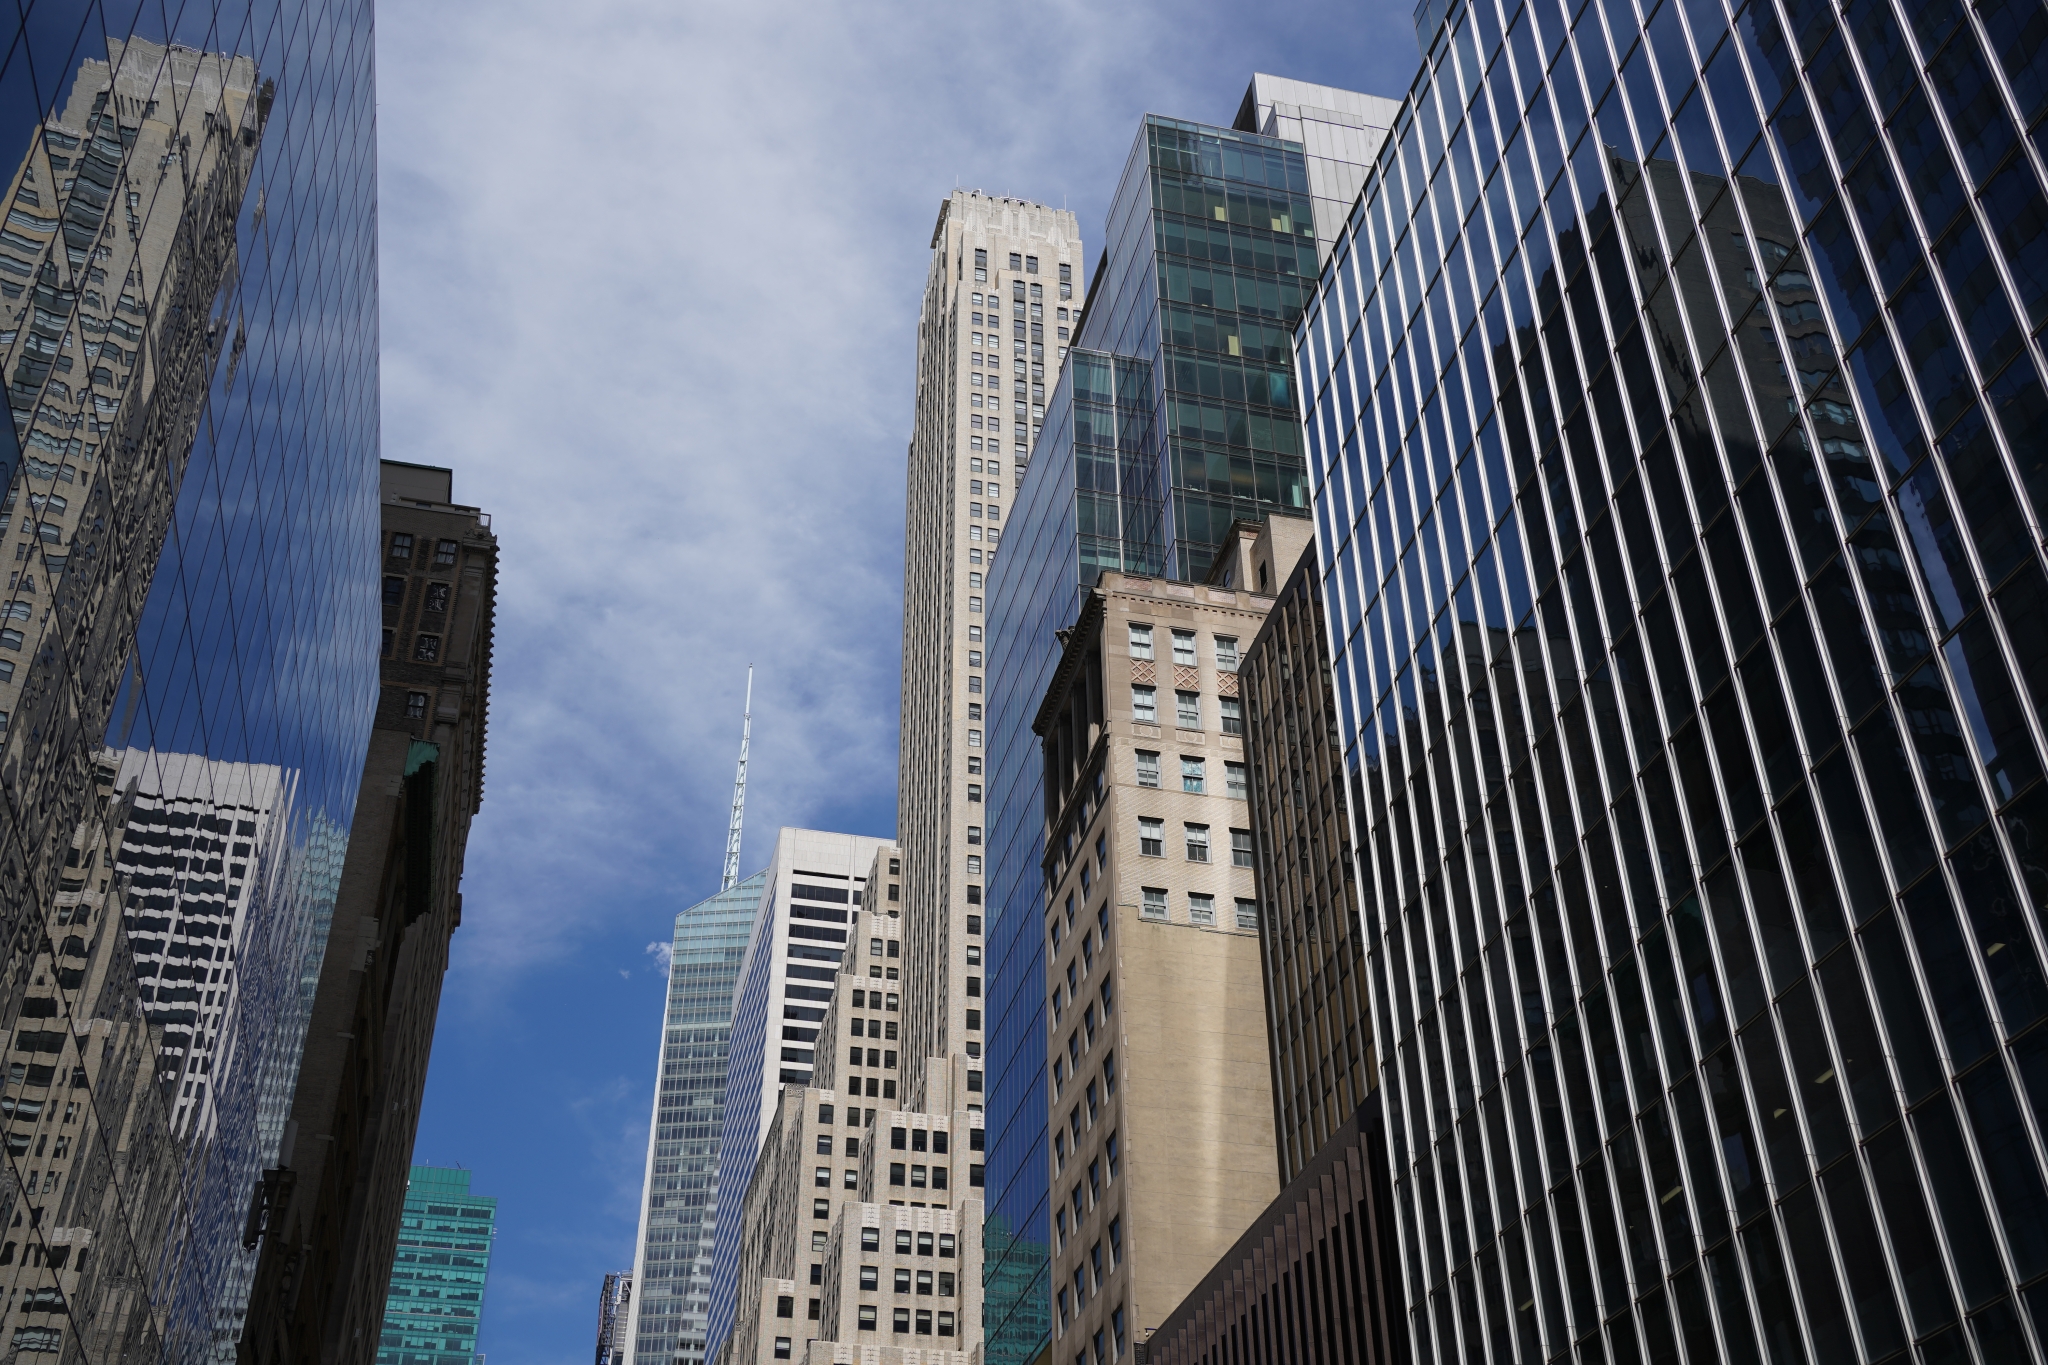 Upwards shot of skyscrapers against a blue sky